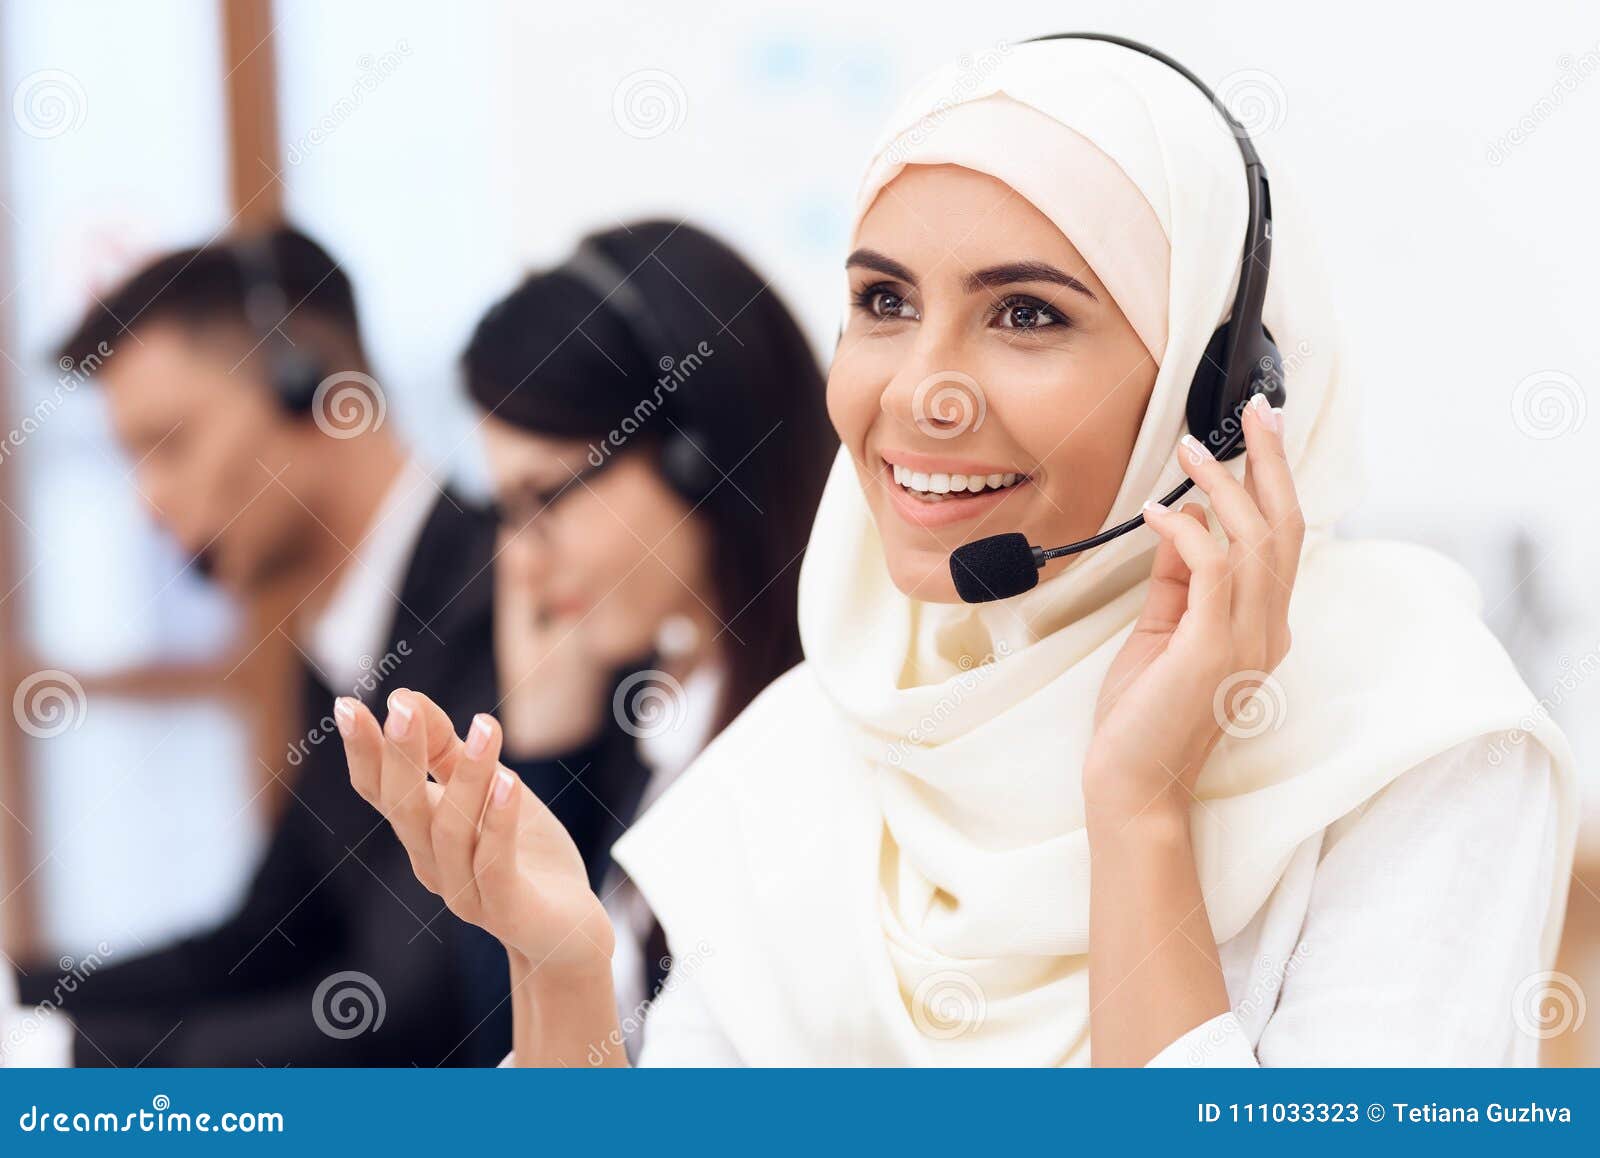 An Arab Woman Works in a Call Center. Arabian Works at Office. Stock